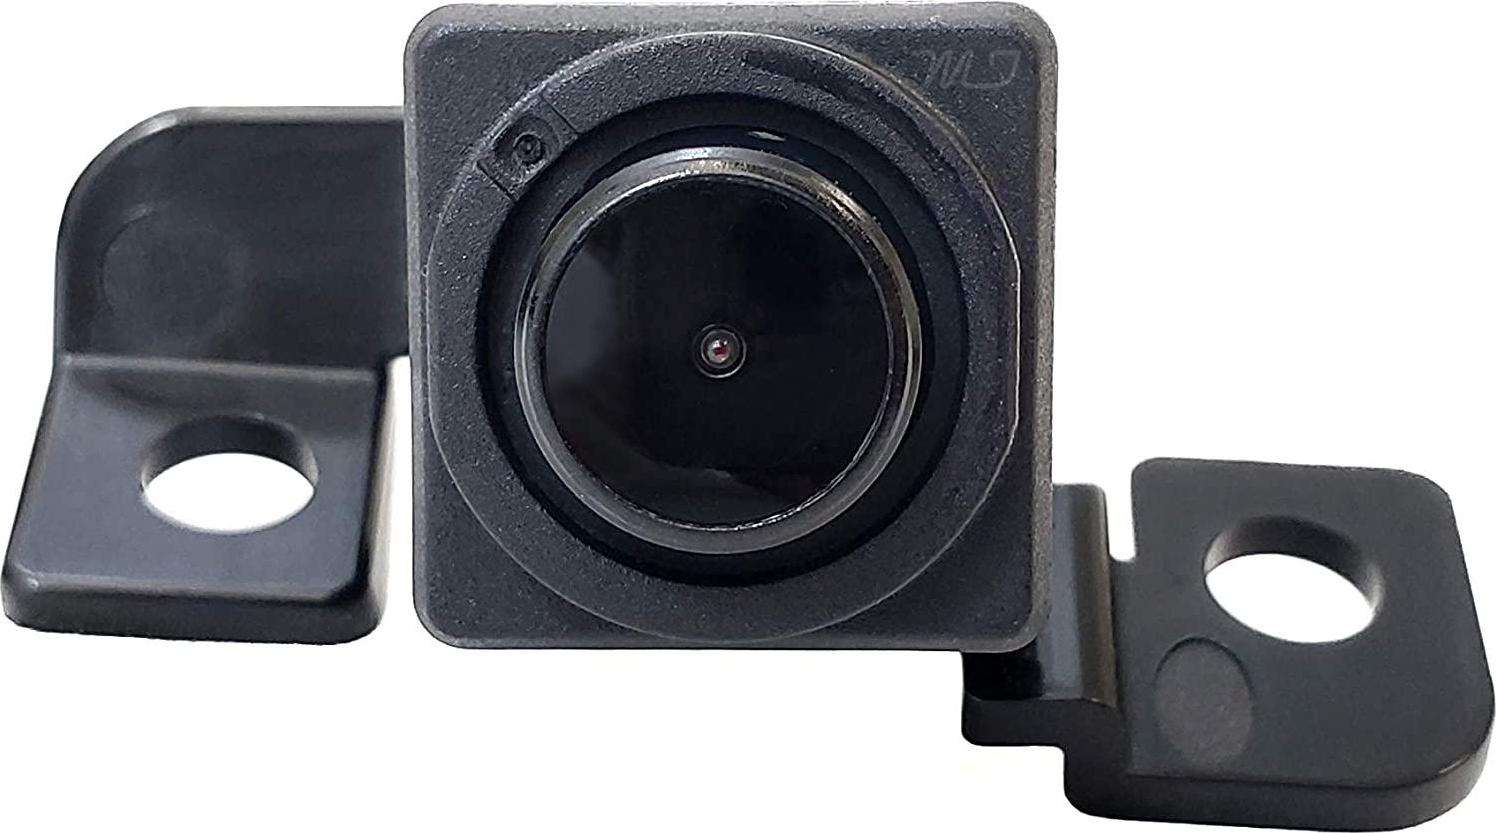 Master Tailgaters, Master Tailgaters Replacement for Kia Sorrento Backup Camera (2011-2013) OE Part # 95760-2P000